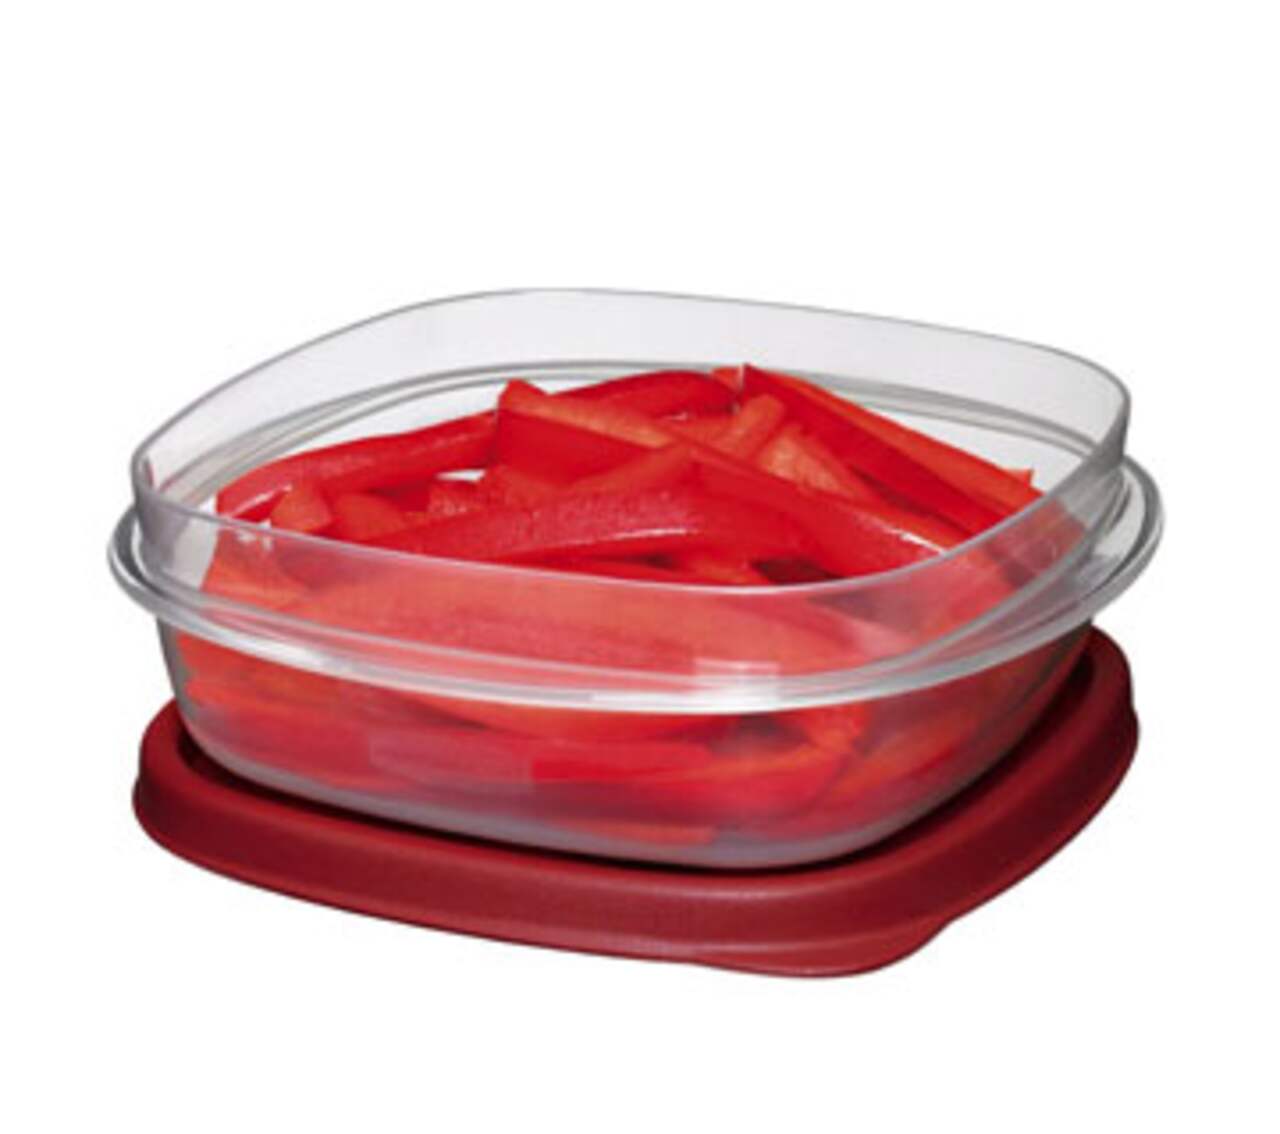 https://media-www.canadiantire.ca/product/living/kitchen/food-storage/0428919/rubbermaid-easyfind-lid-3-cup-square-60ee1c42-b634-442f-bb57-bf0cadba1d5e.png?imdensity=1&imwidth=640&impolicy=mZoom